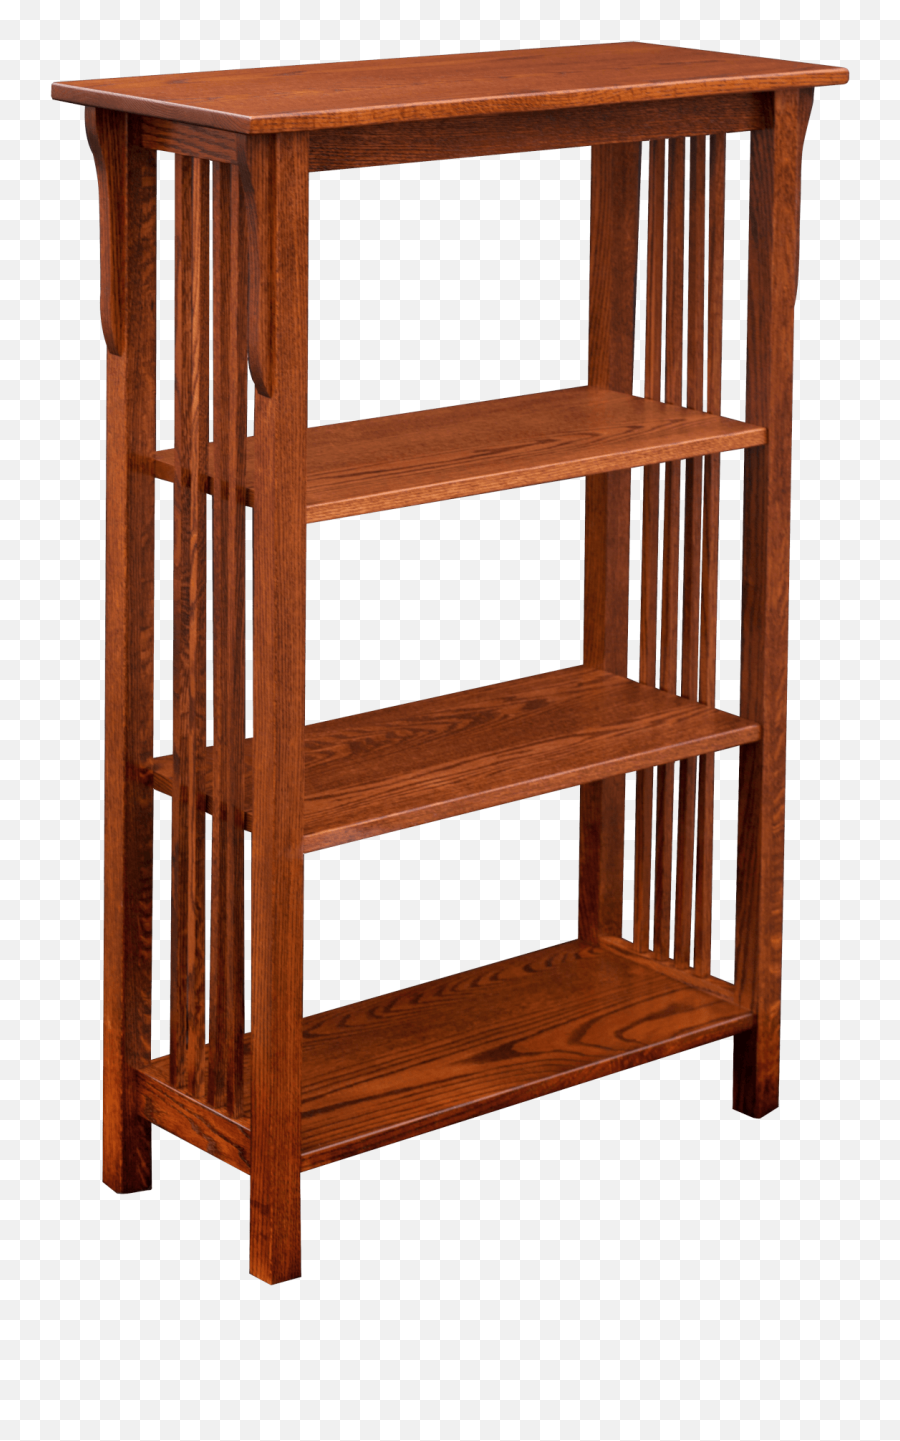 Bookshelves By Jericho Woodworking Dalton Ohio - Bookcase Png,Bookcase Png